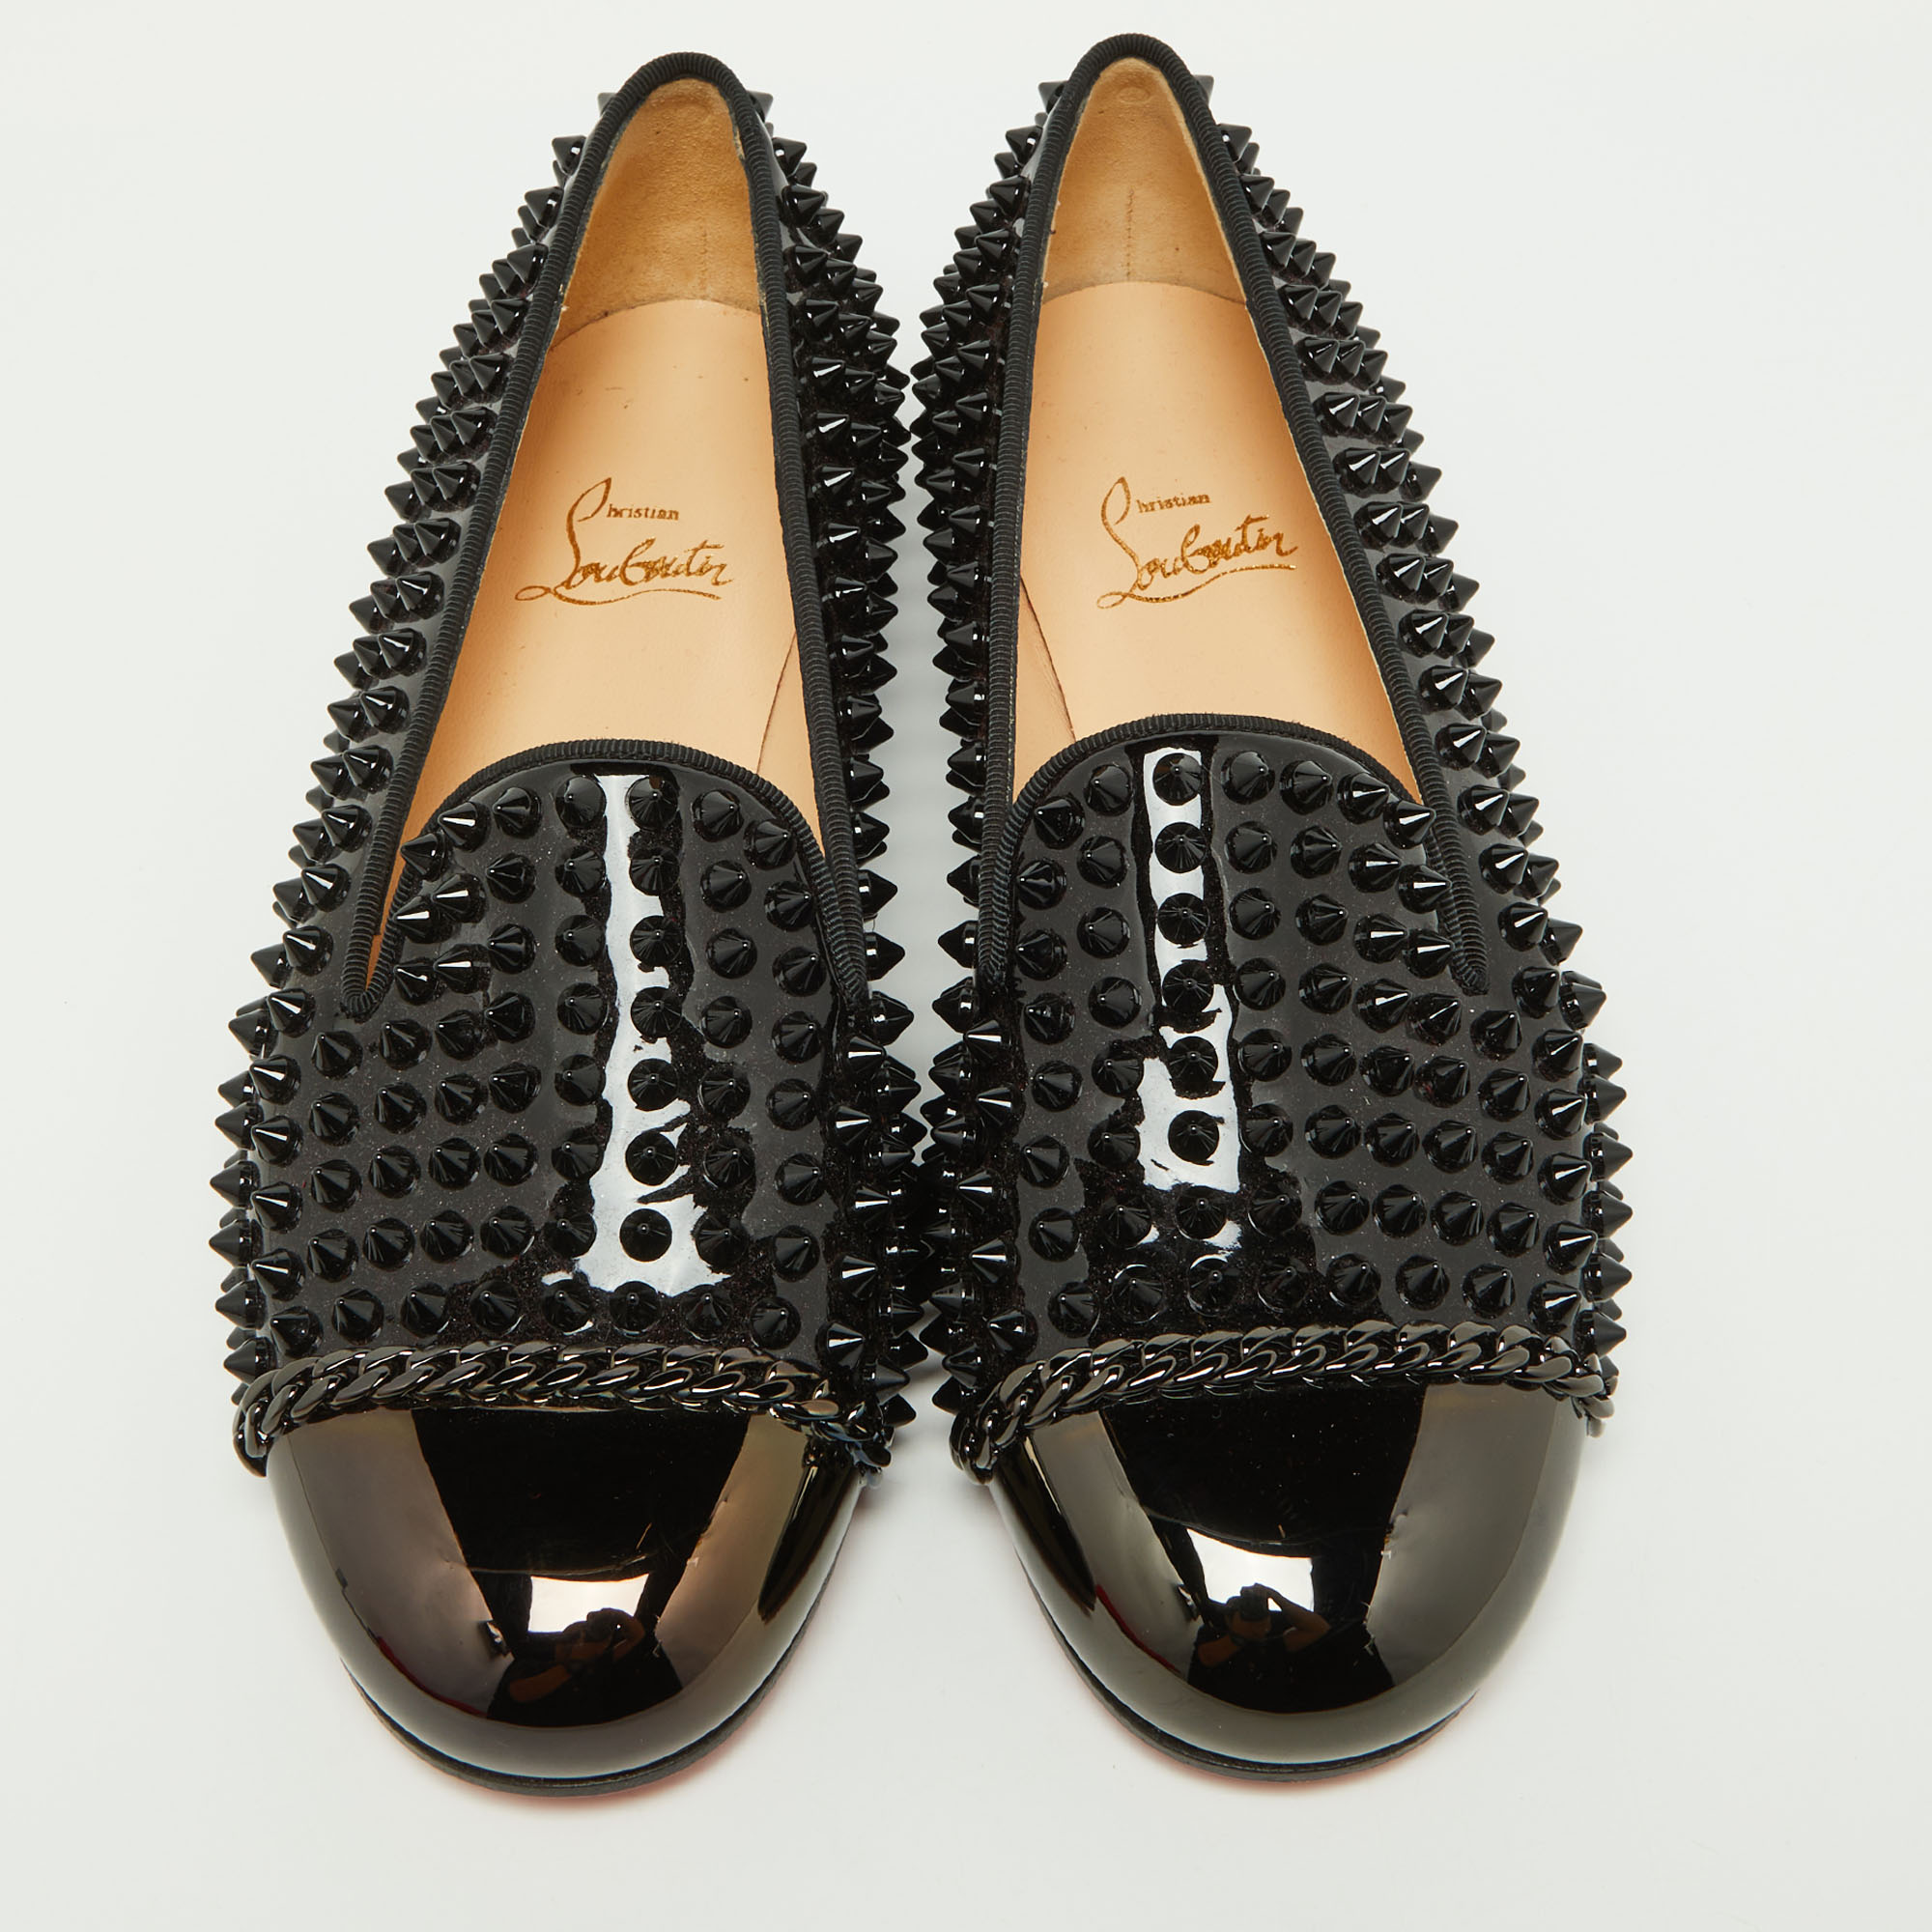 Christian Louboutin Black Patent Leather Glitz Spikes Loafers Size 38